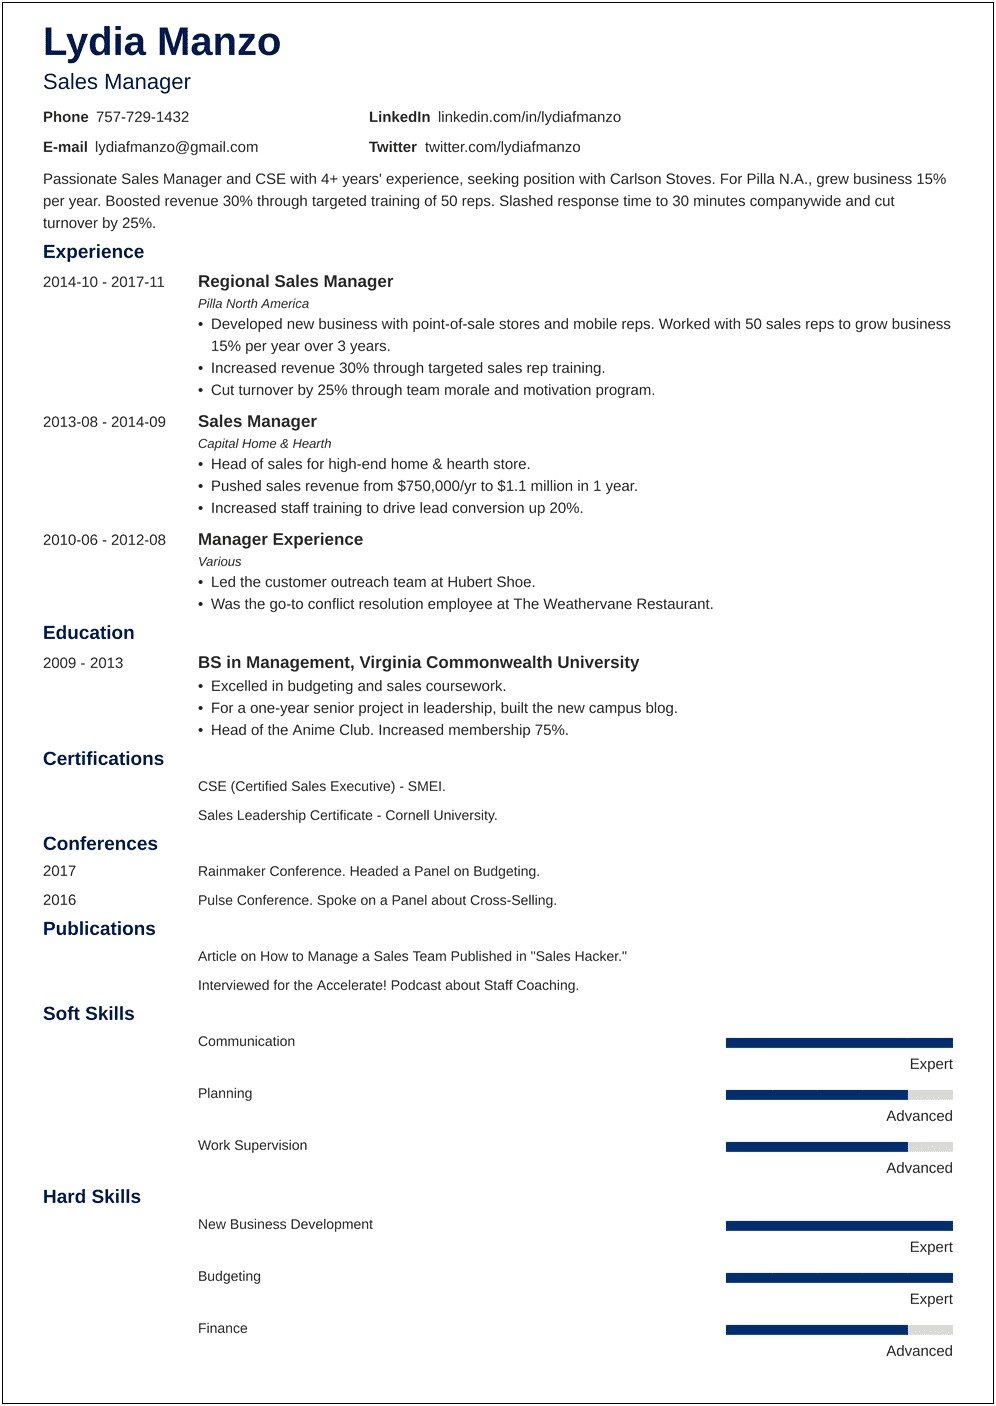 Best Type Of Resume For Managerial Position